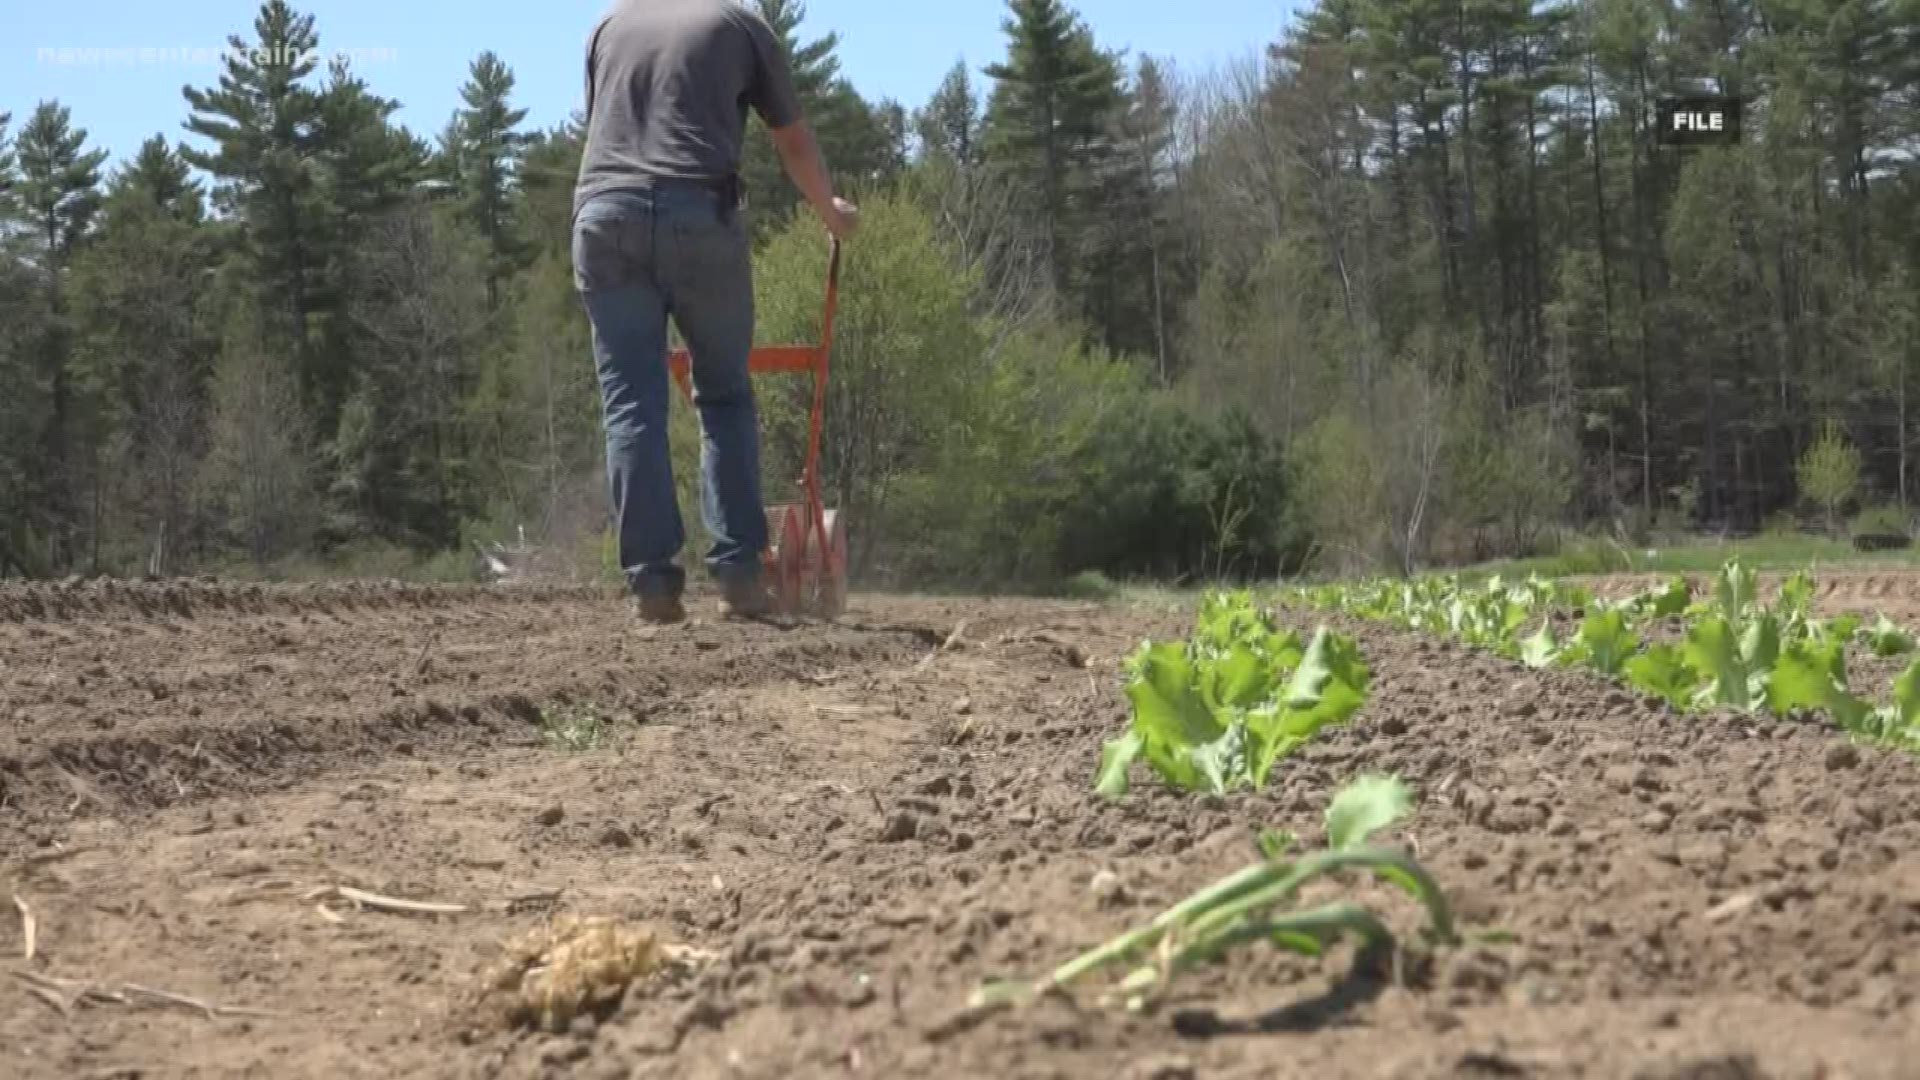 More than $600,000 is coming to Maine to support a project that teaches refugees about sustainable farming practics.